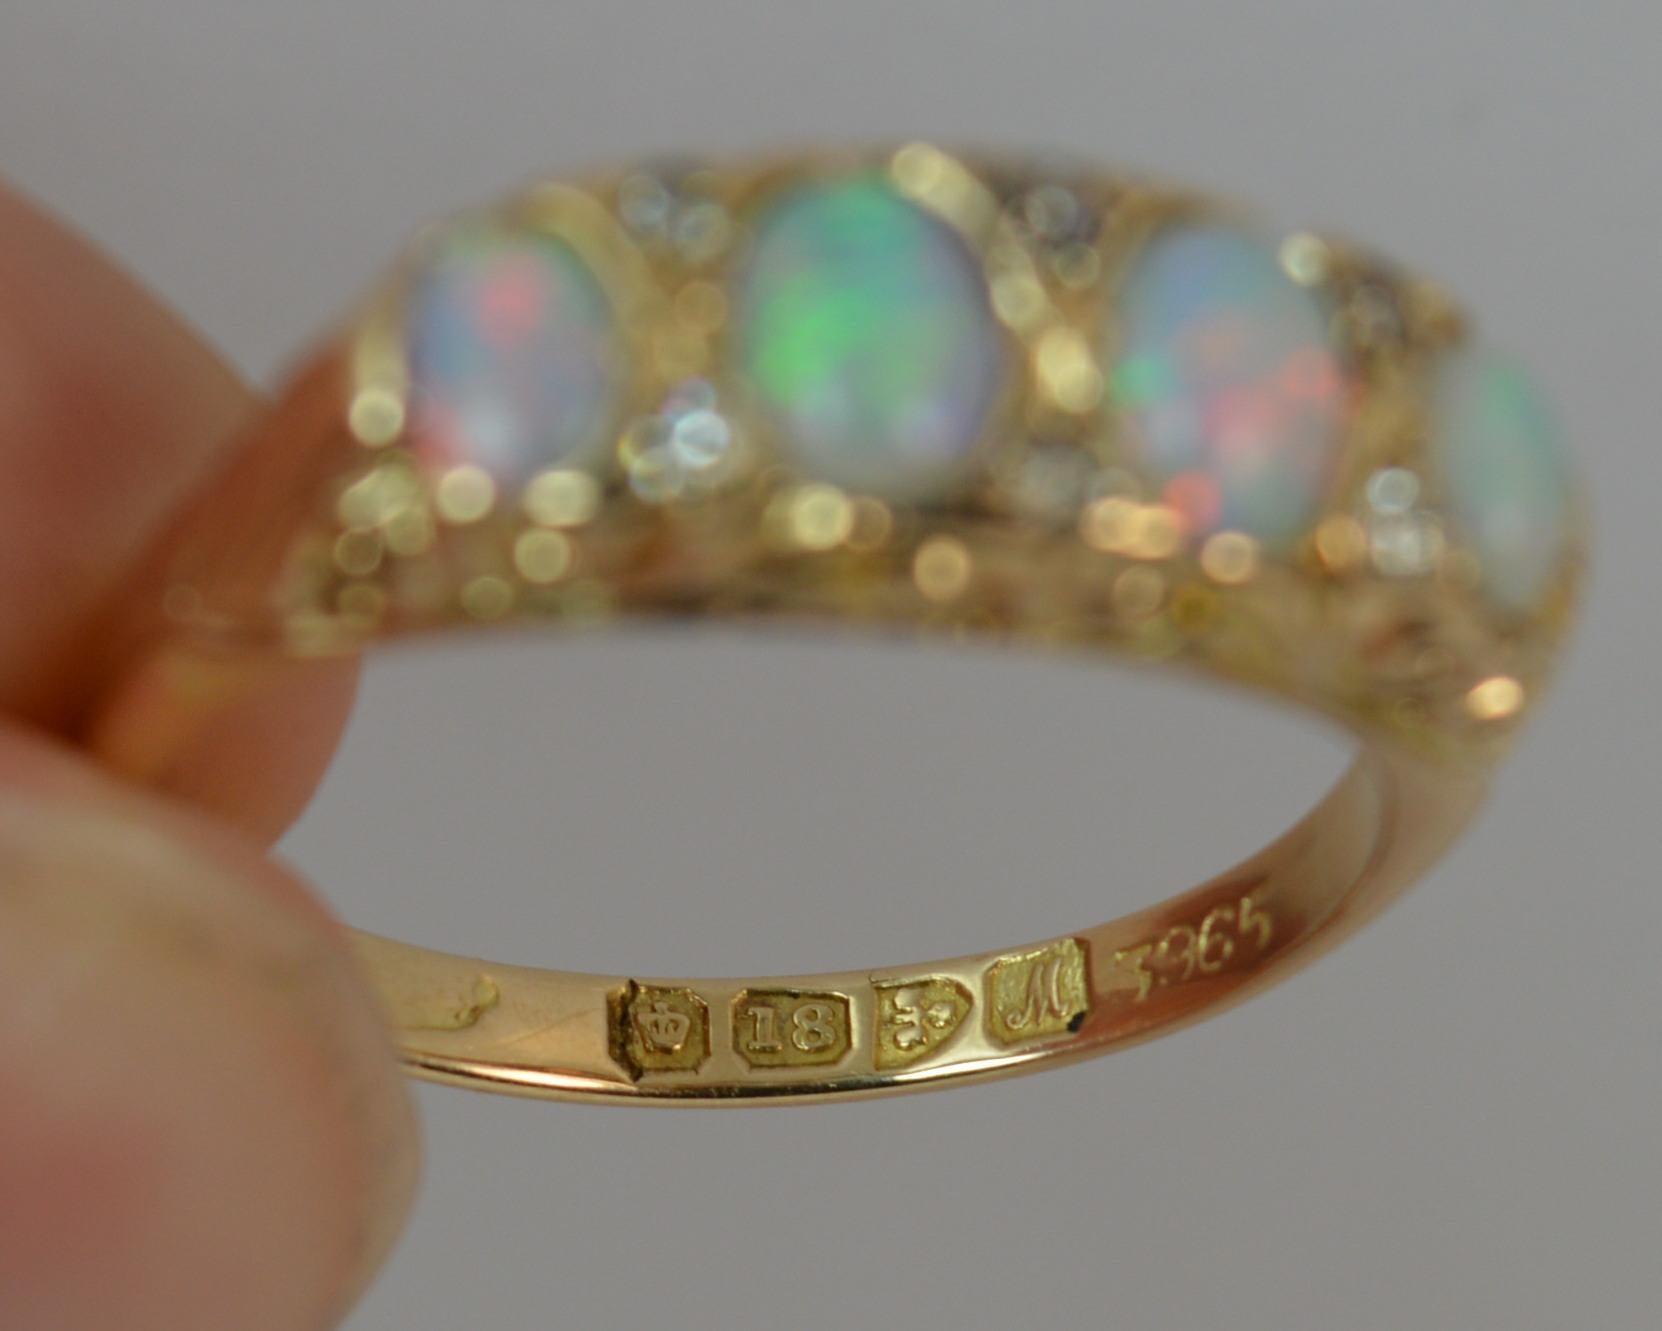 
A beautiful true antique Opal and Diamond ring.

Ideal stack or half eternity ring.

Designed with four natural oval shaped opals, full or colour with pairs of natural diamonds in between.

18mm x 6.5mm head. Pierced head setting. Protruding 4.2mm